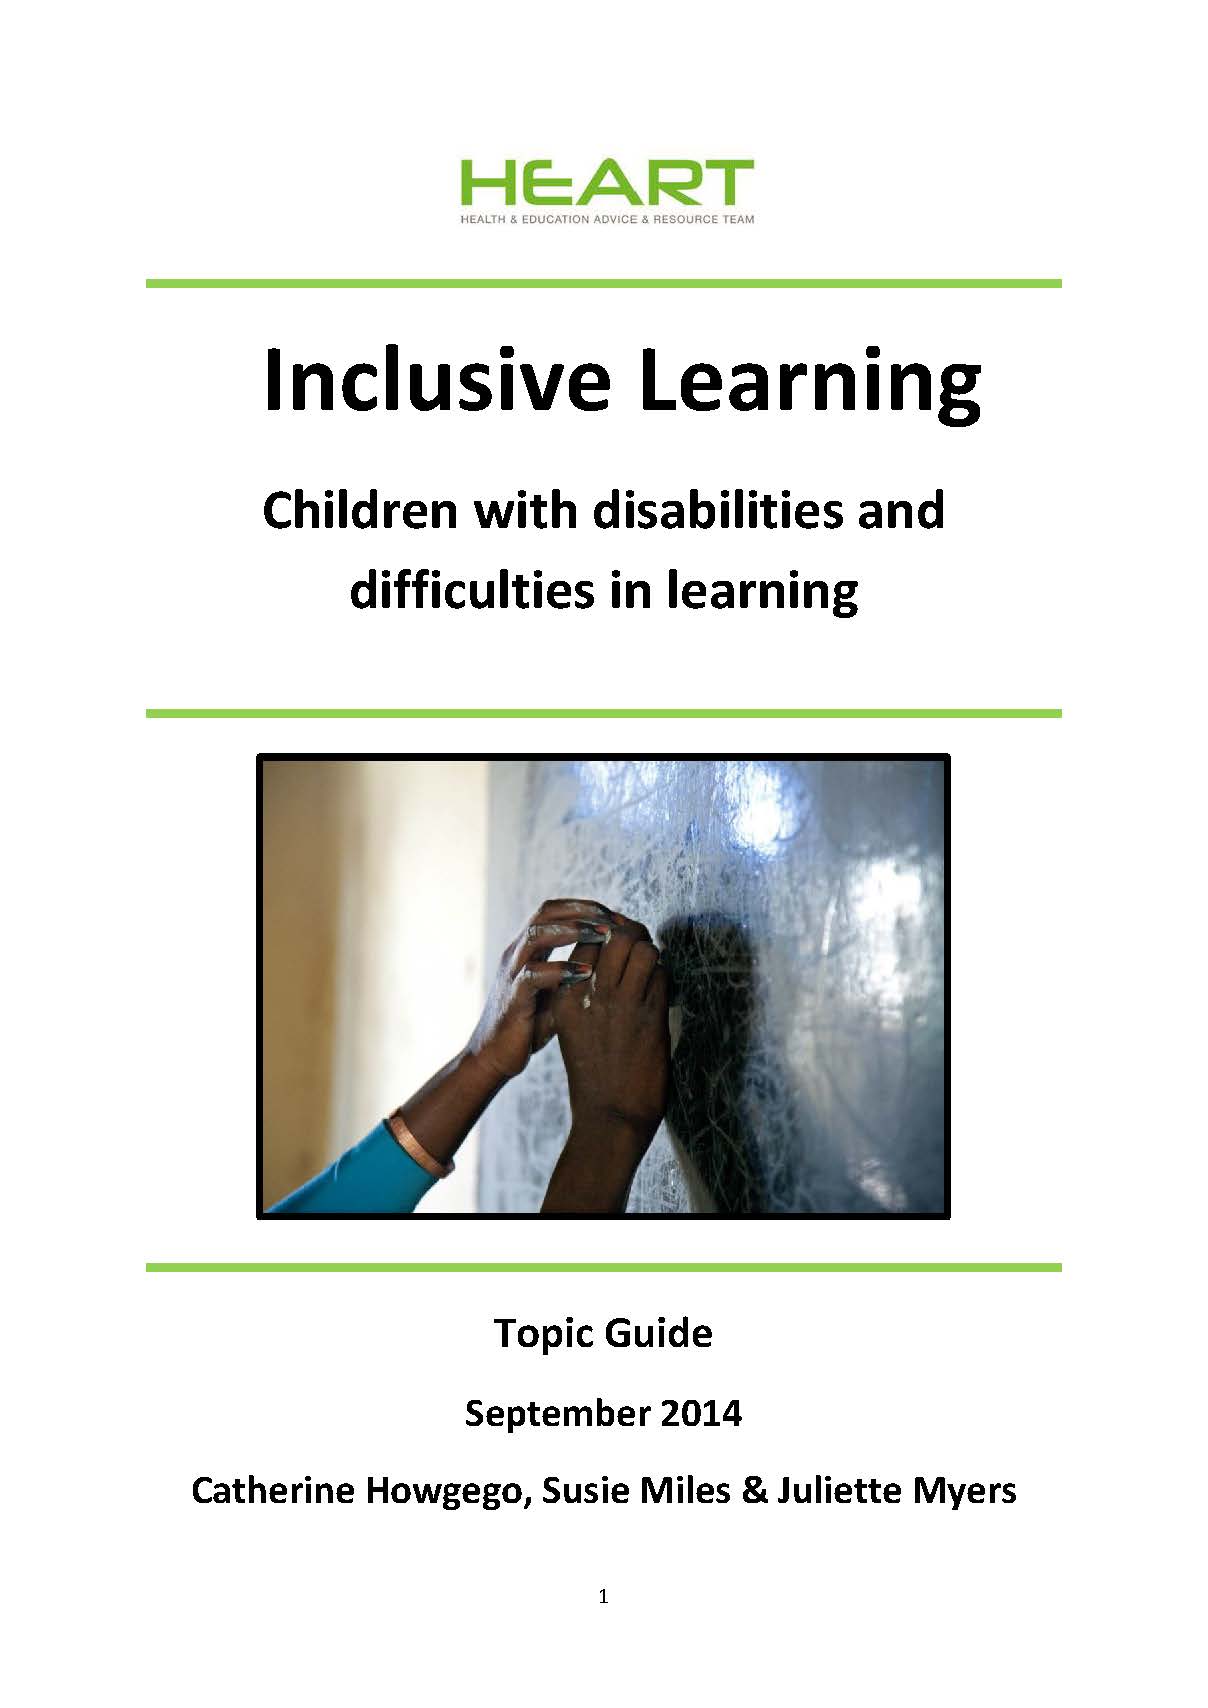 Inclusive-Learning-Topic-Guide